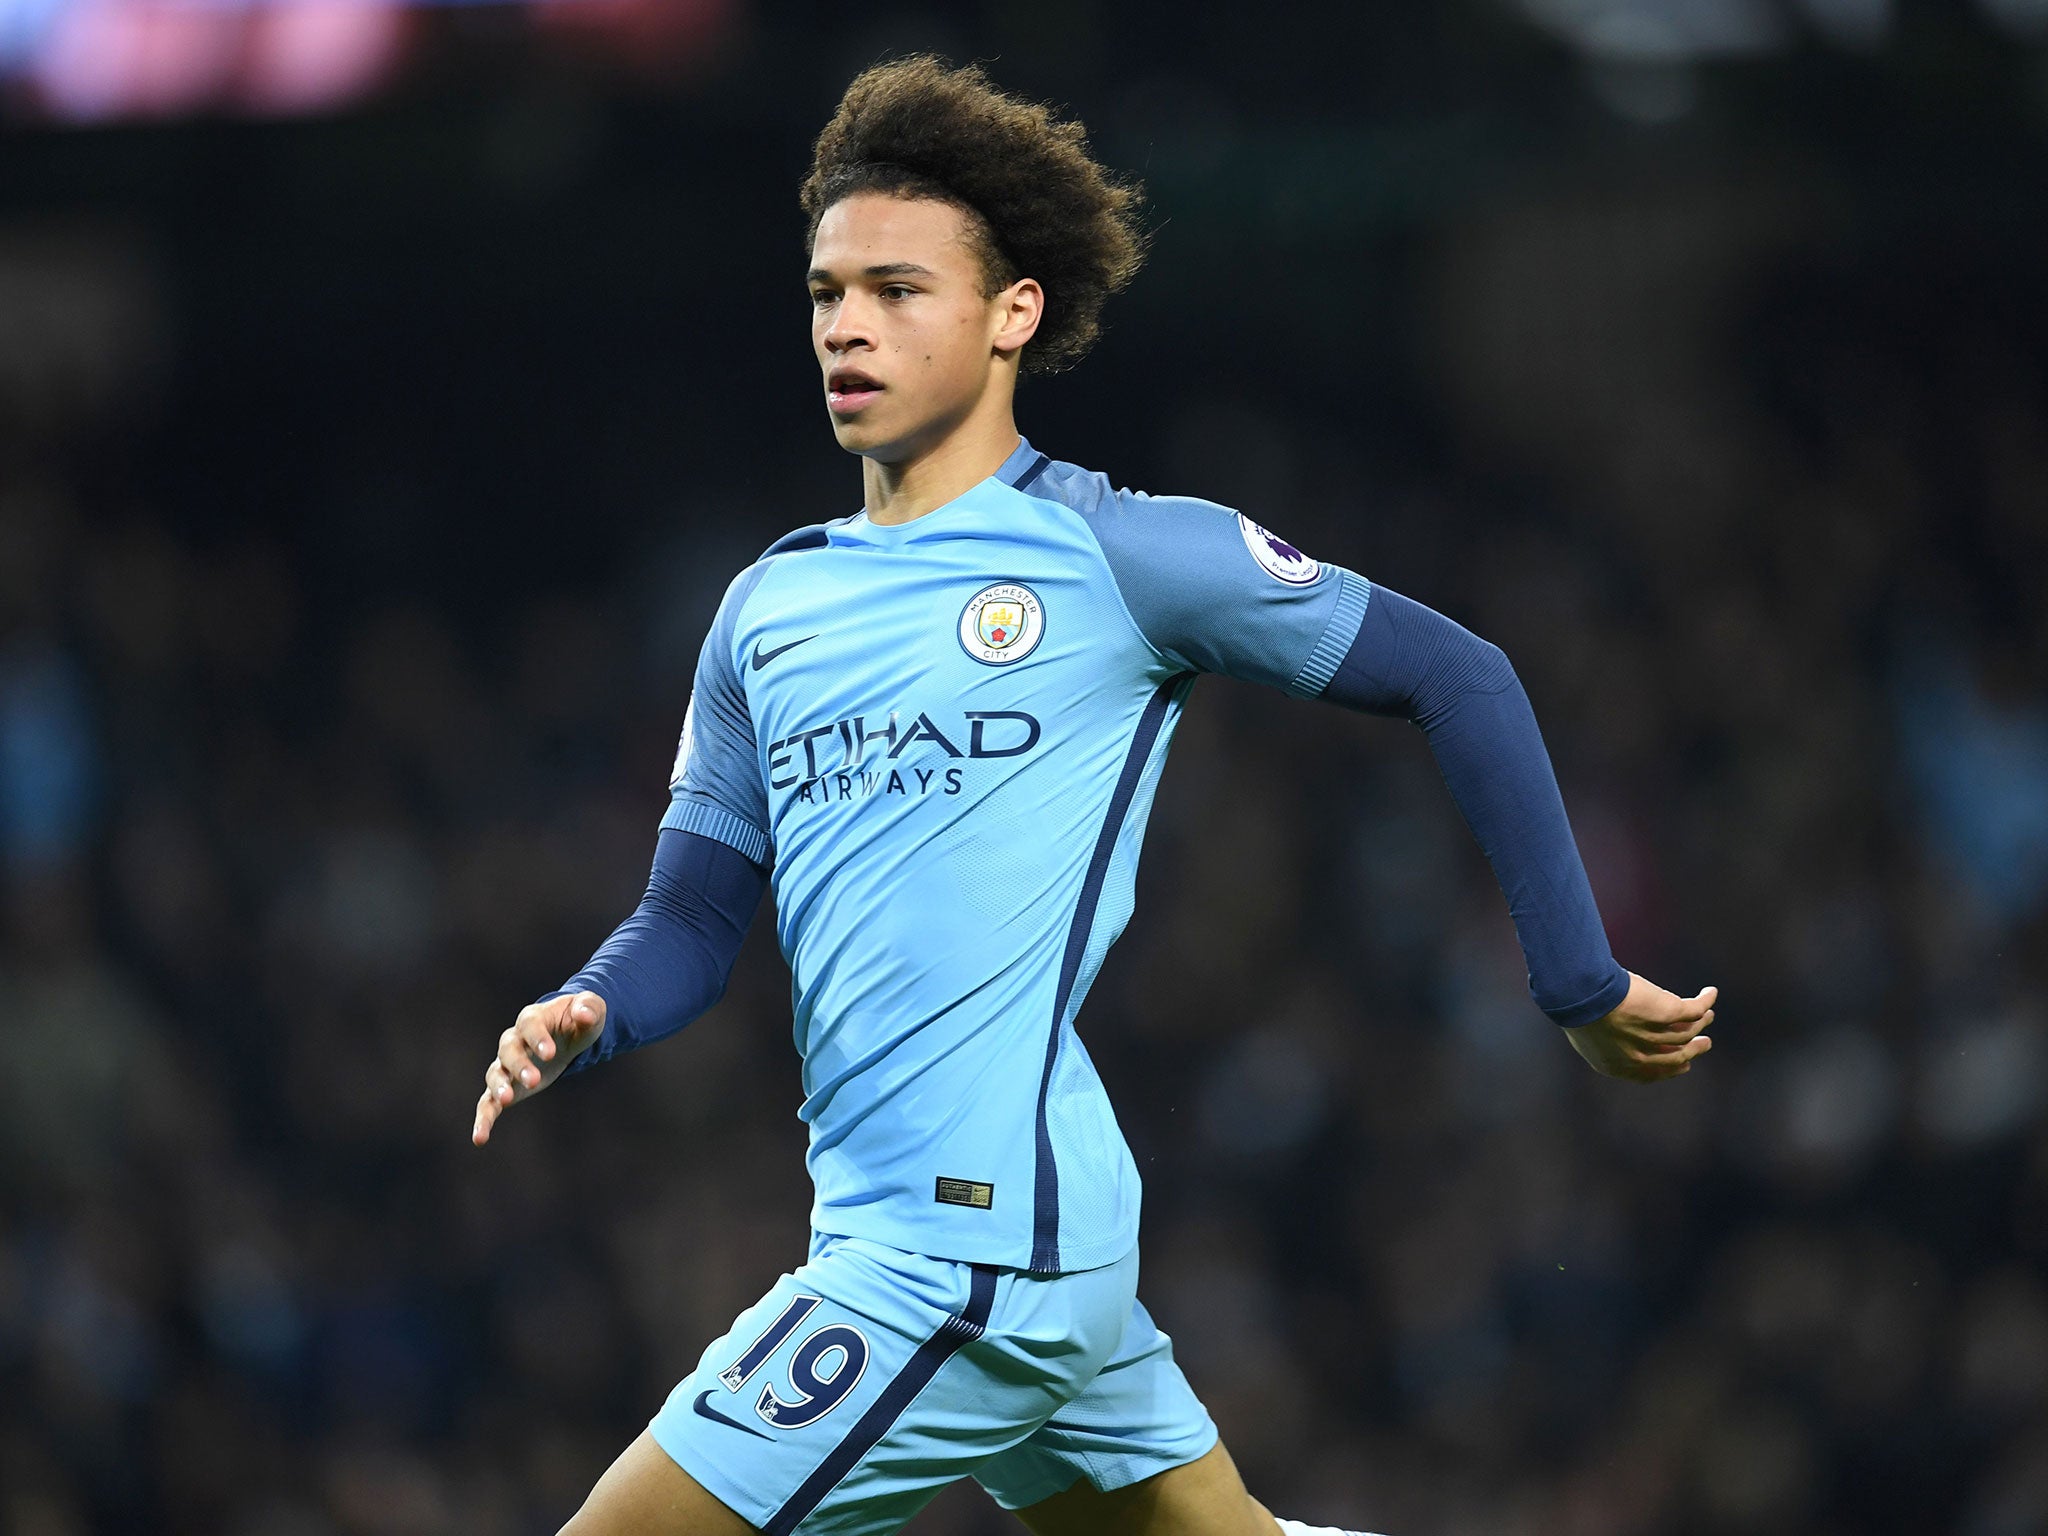 Leroy Sane has found form since the turn of the year, and it's a long way from nearly being ditched by Schalke